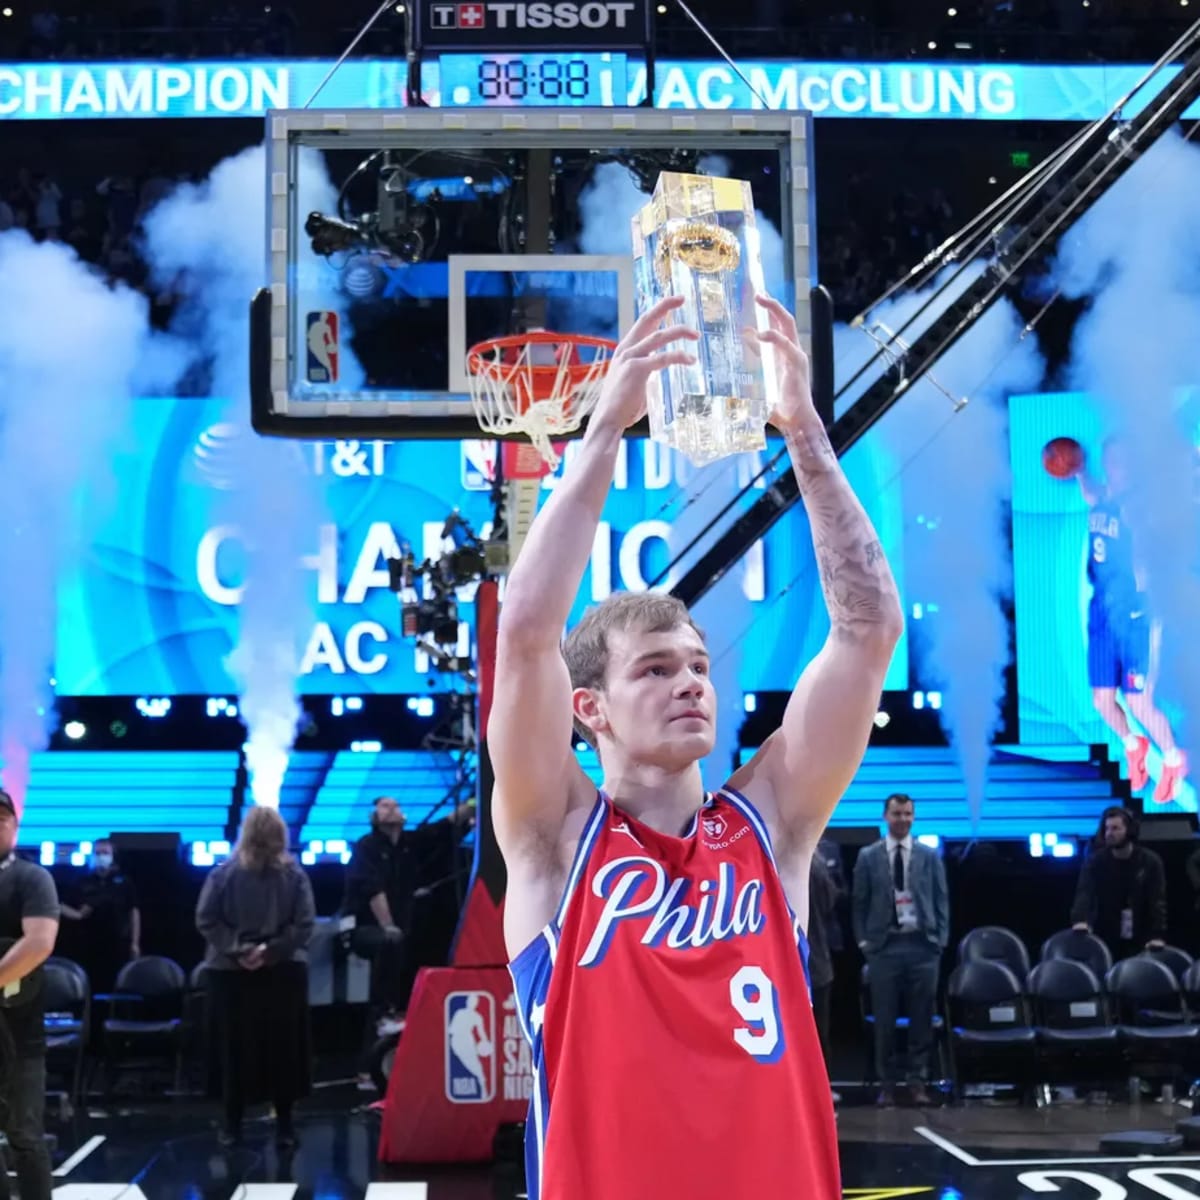 Mac McClung, now the NBA dunk champ, wasn't an unknown - WTOP News